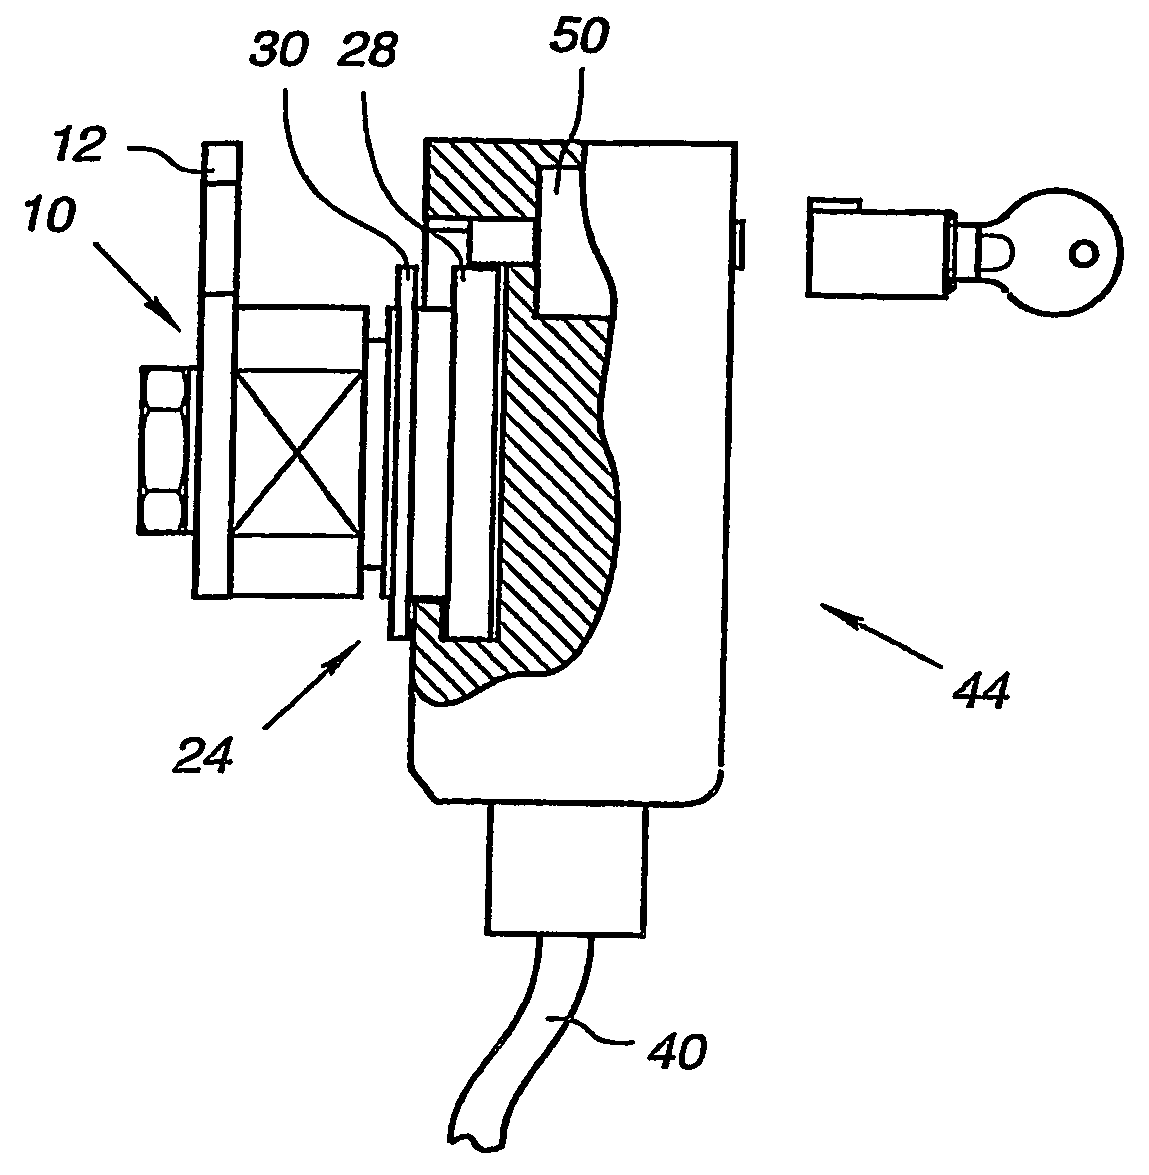 Arrangement for arresting a portable object to a stationary object by a cable